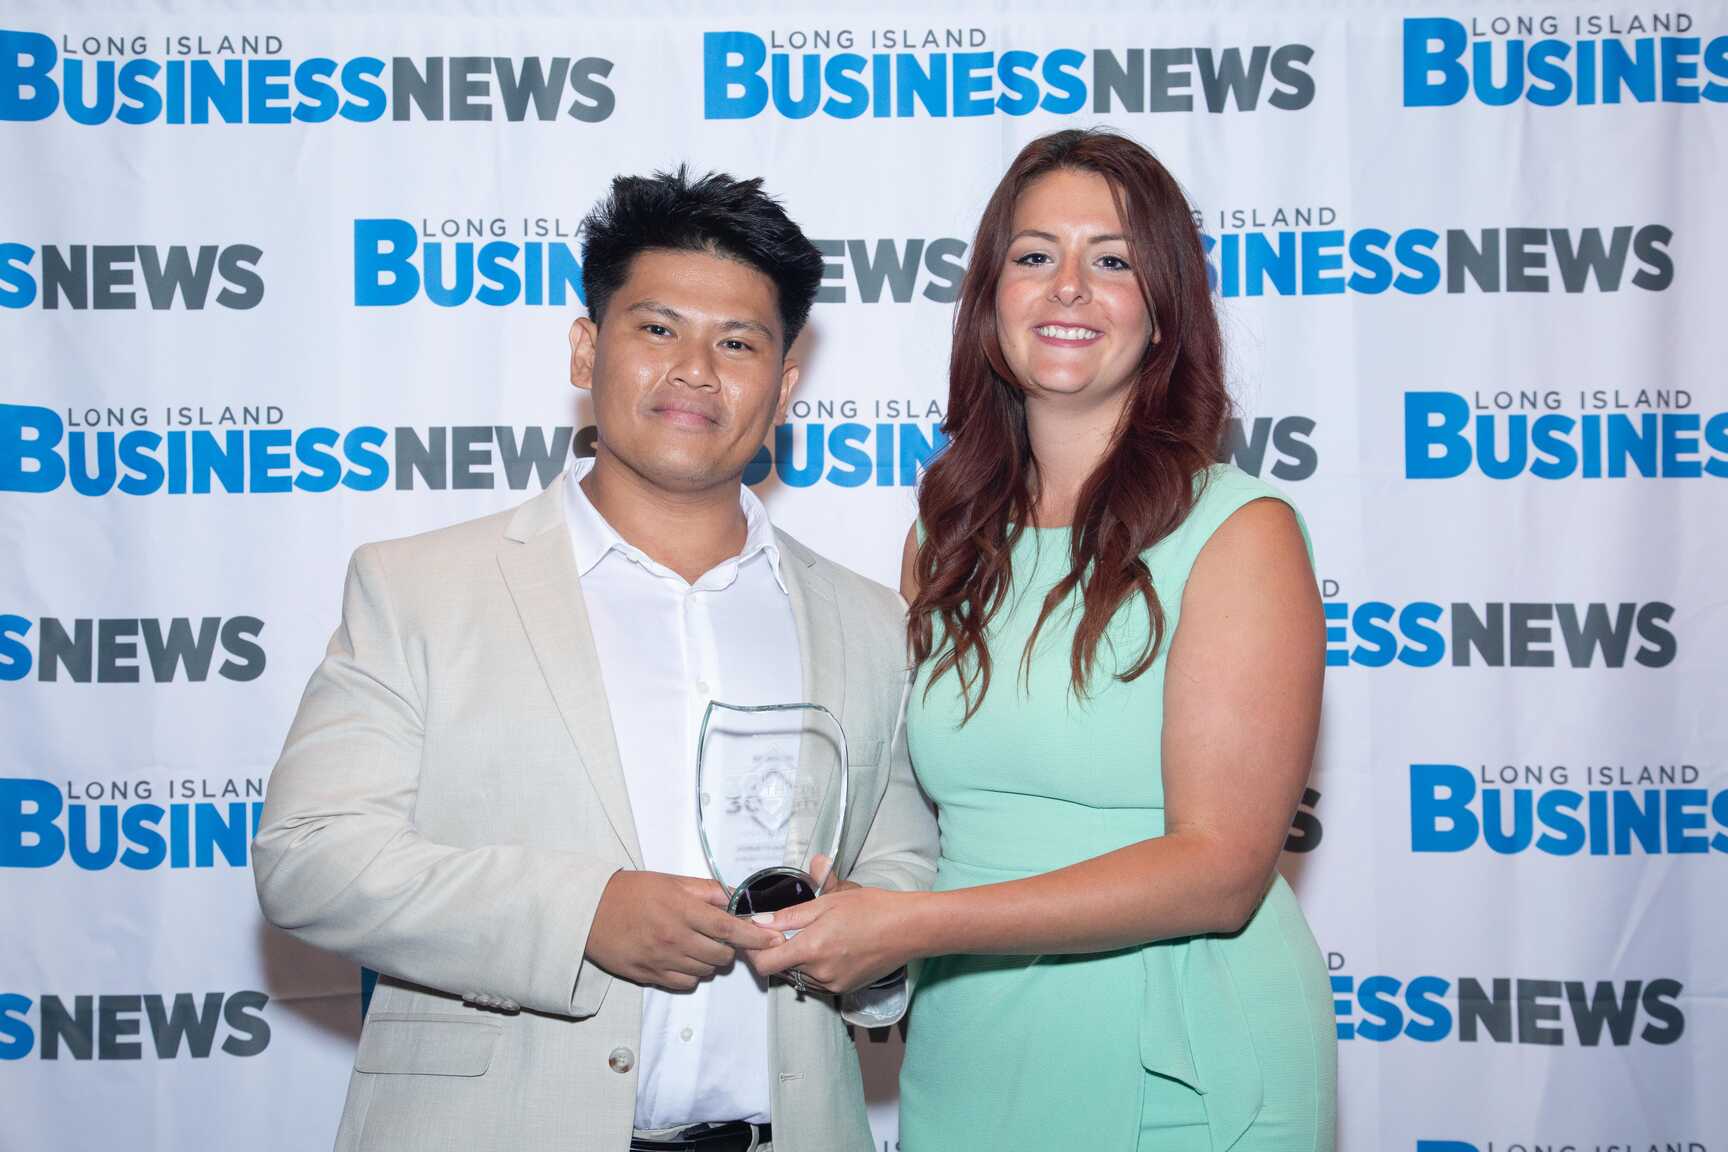 Congratulations Jonathan Chu for being a LIBN’s 30 Under 30 Honoree!